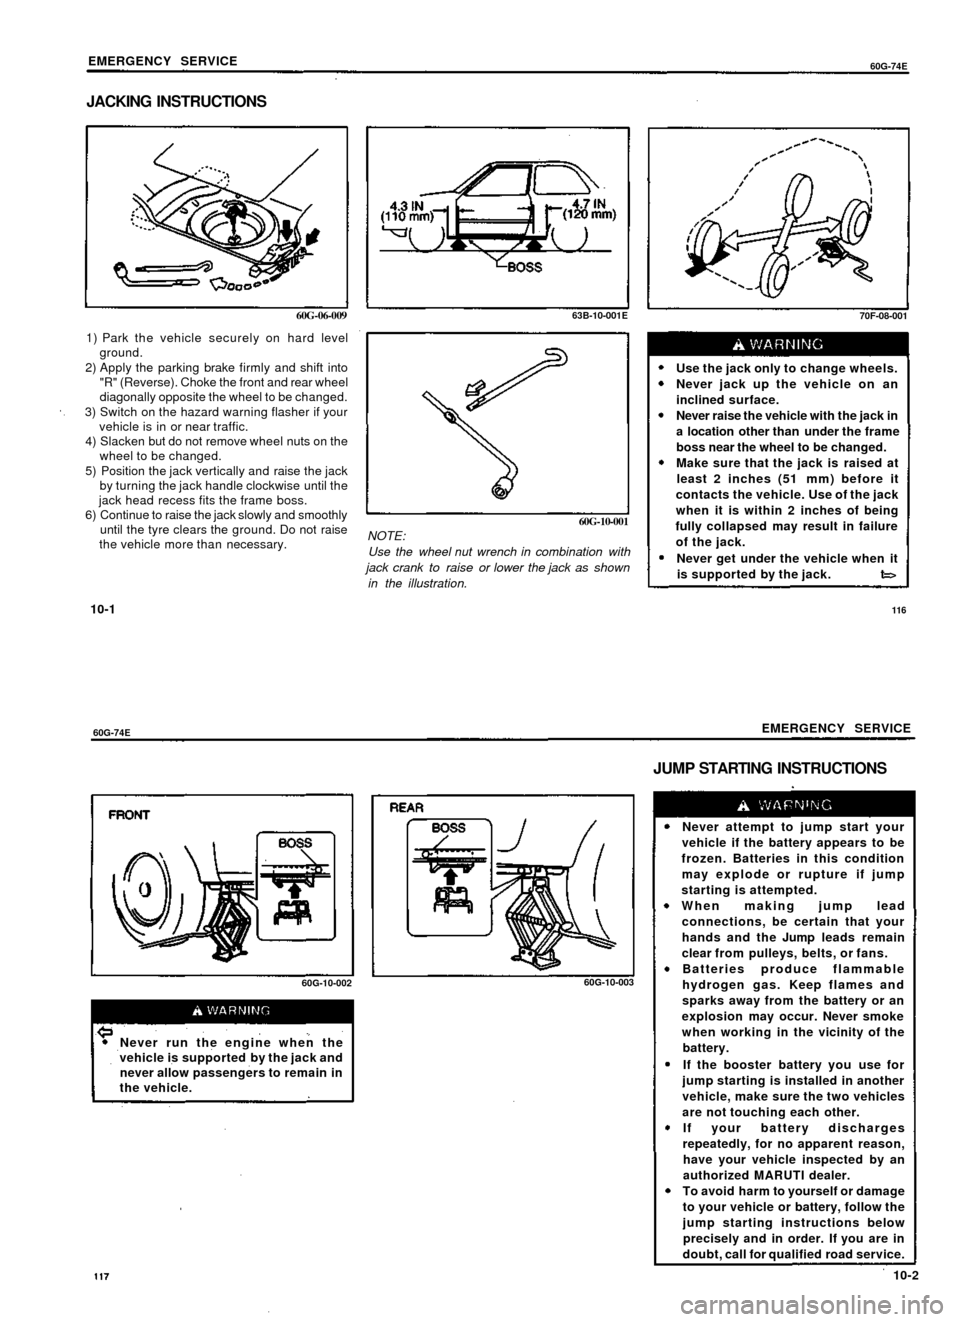 SUZUKI BALENO 1999 1.G User Guide 
EMERGENCY SERVICE

60G-74E

JACKING INSTRUCTIONS

60G-06-009

1) Park the vehicle securely on hard level

ground.

2) Apply the parking brake firmly and shift into

"R" (Reverse). Choke the front and